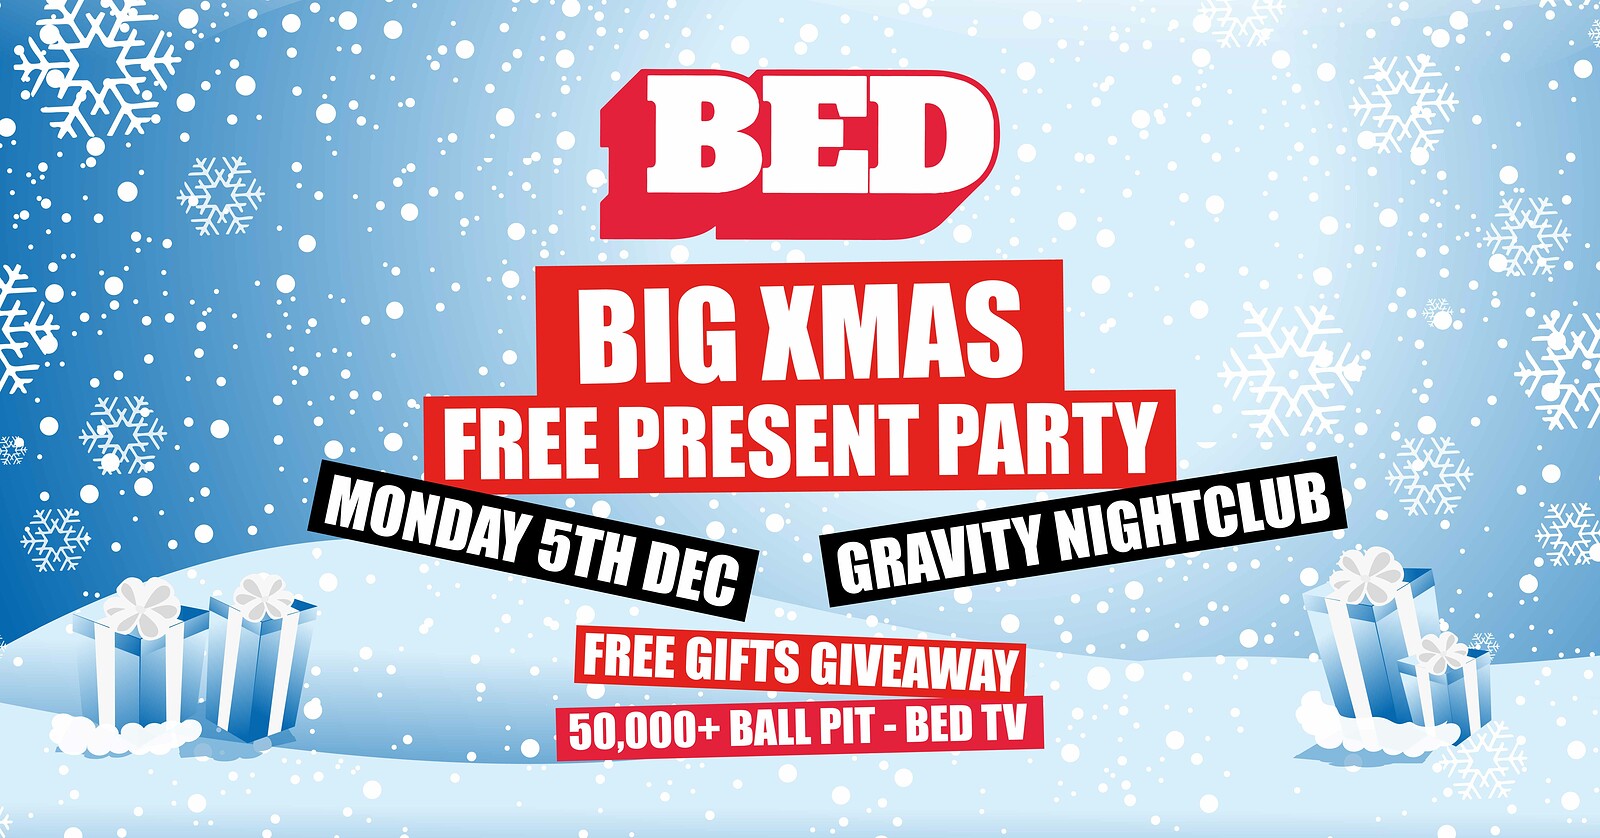 BED: X MAS FREE PRESENT PARTY at Gravity Bristol